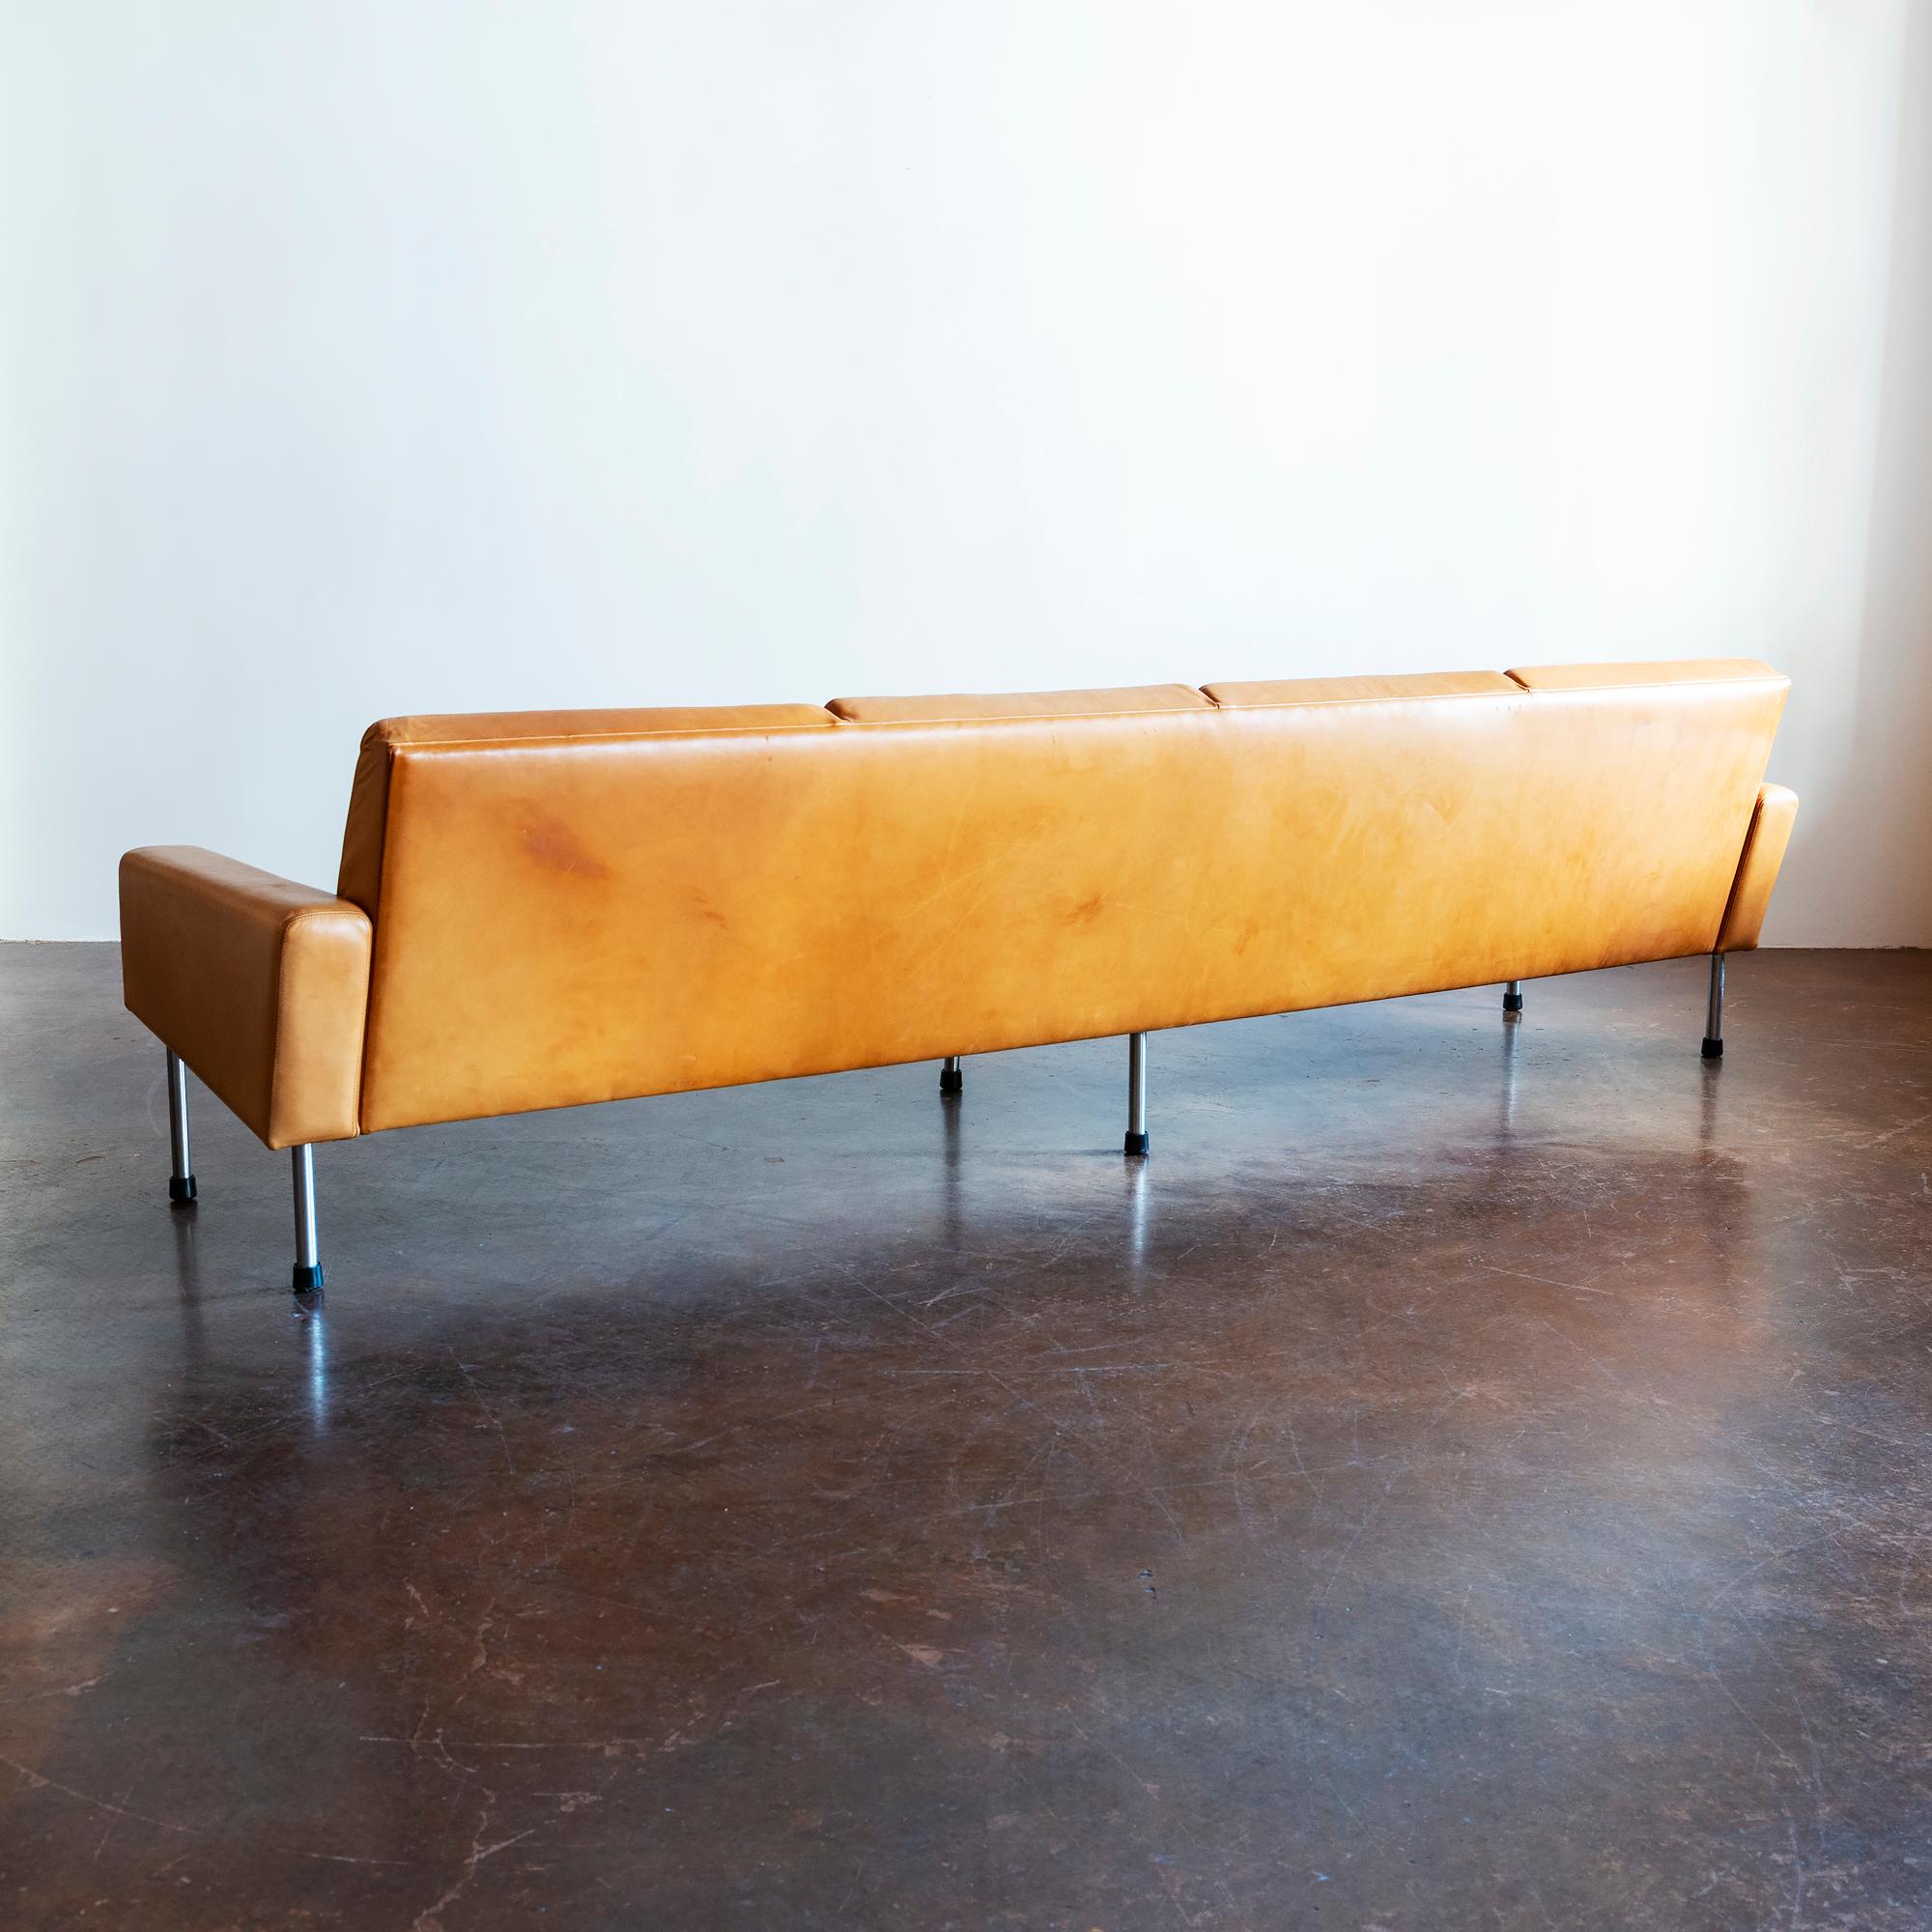 Hans Wegner freestanding four-seat Airport sofa, model AP 34/4, in cognac patinated leather. Designed in 1954 and manufactured by AP Stolen, Denmark, 1960s.